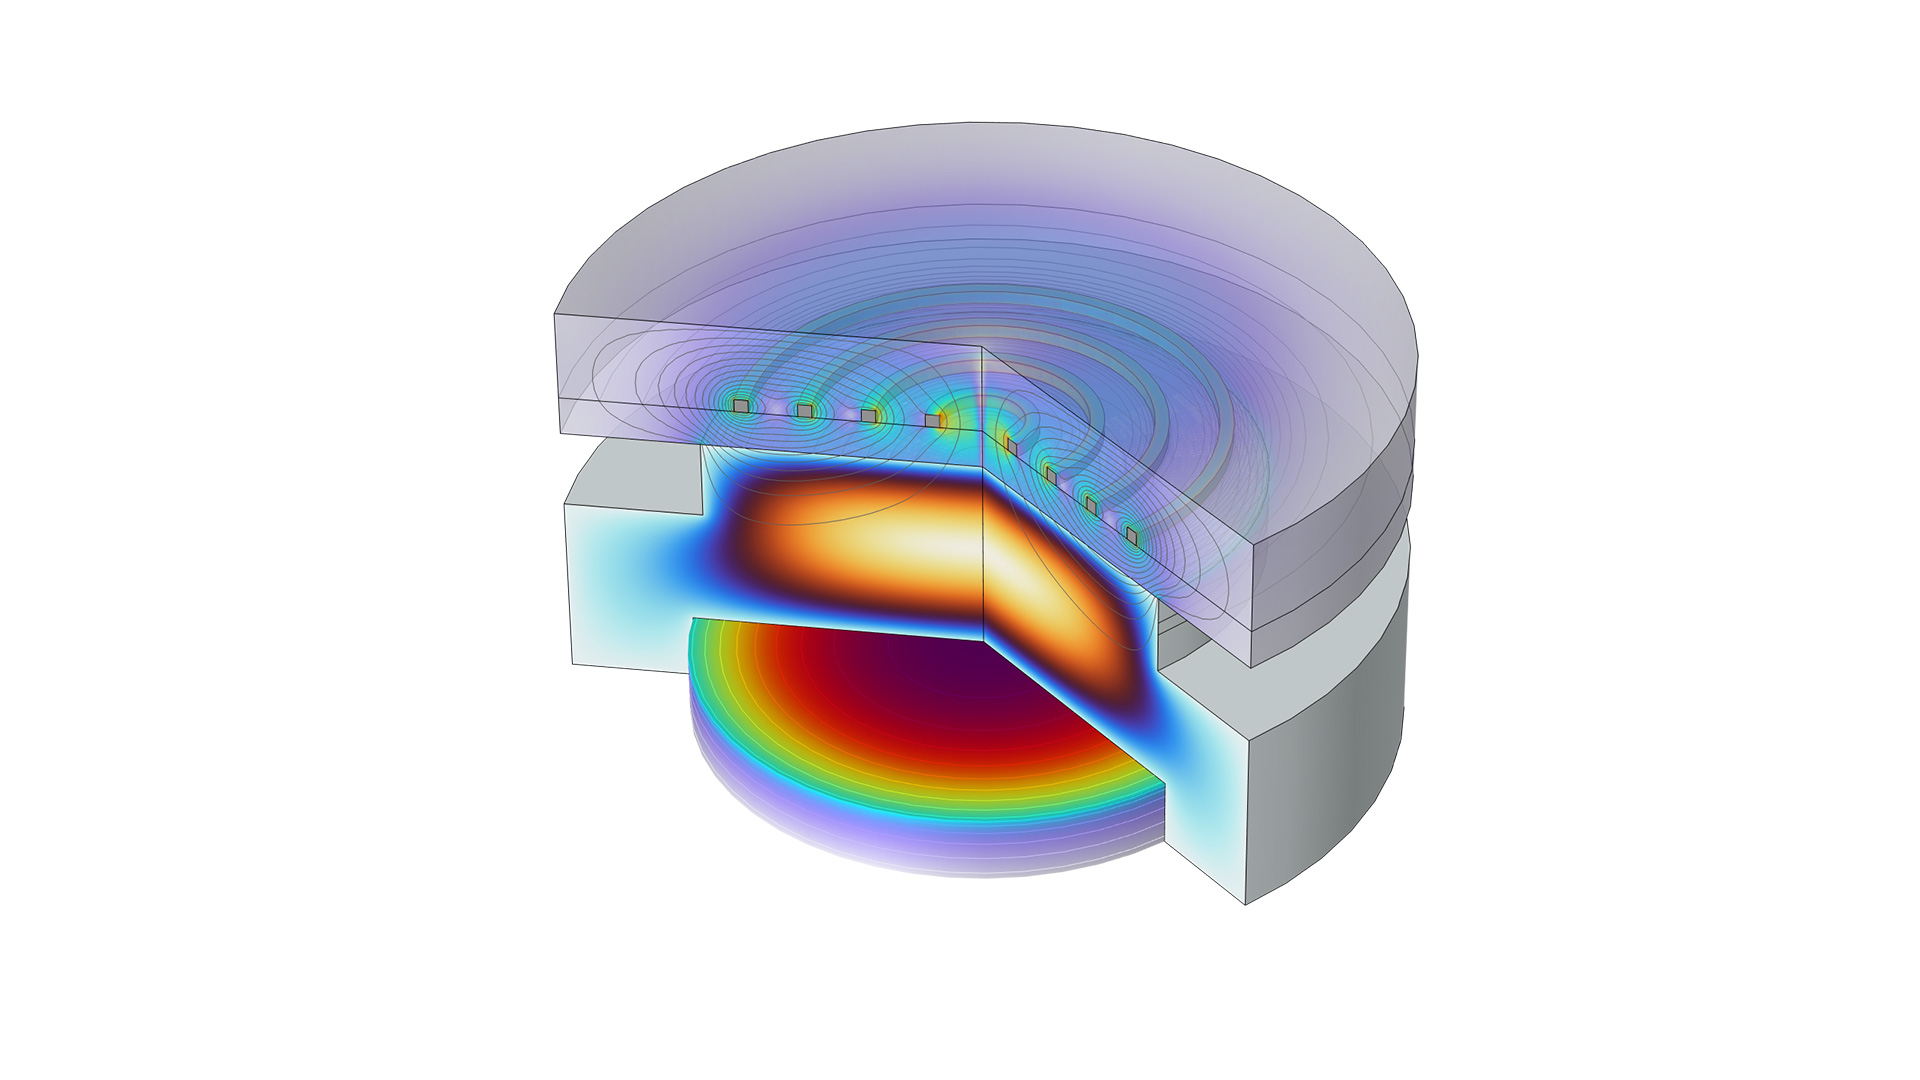 A reactor model in the Thermal Wave and Prism color tables showing the fluid flow and gas heating results.